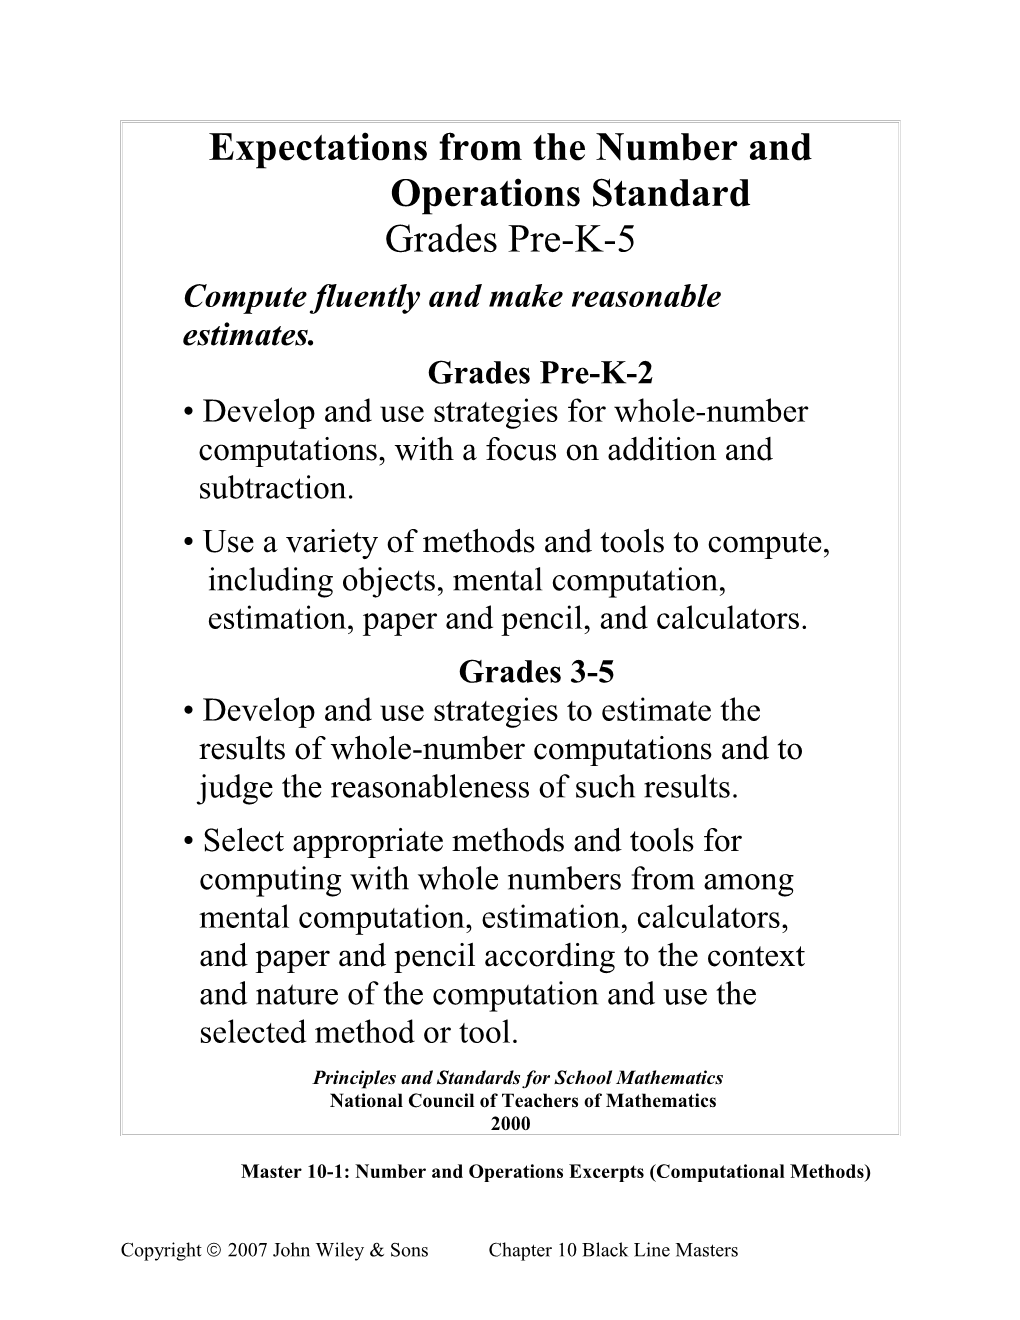 Expectations from the Number and Operations Standard